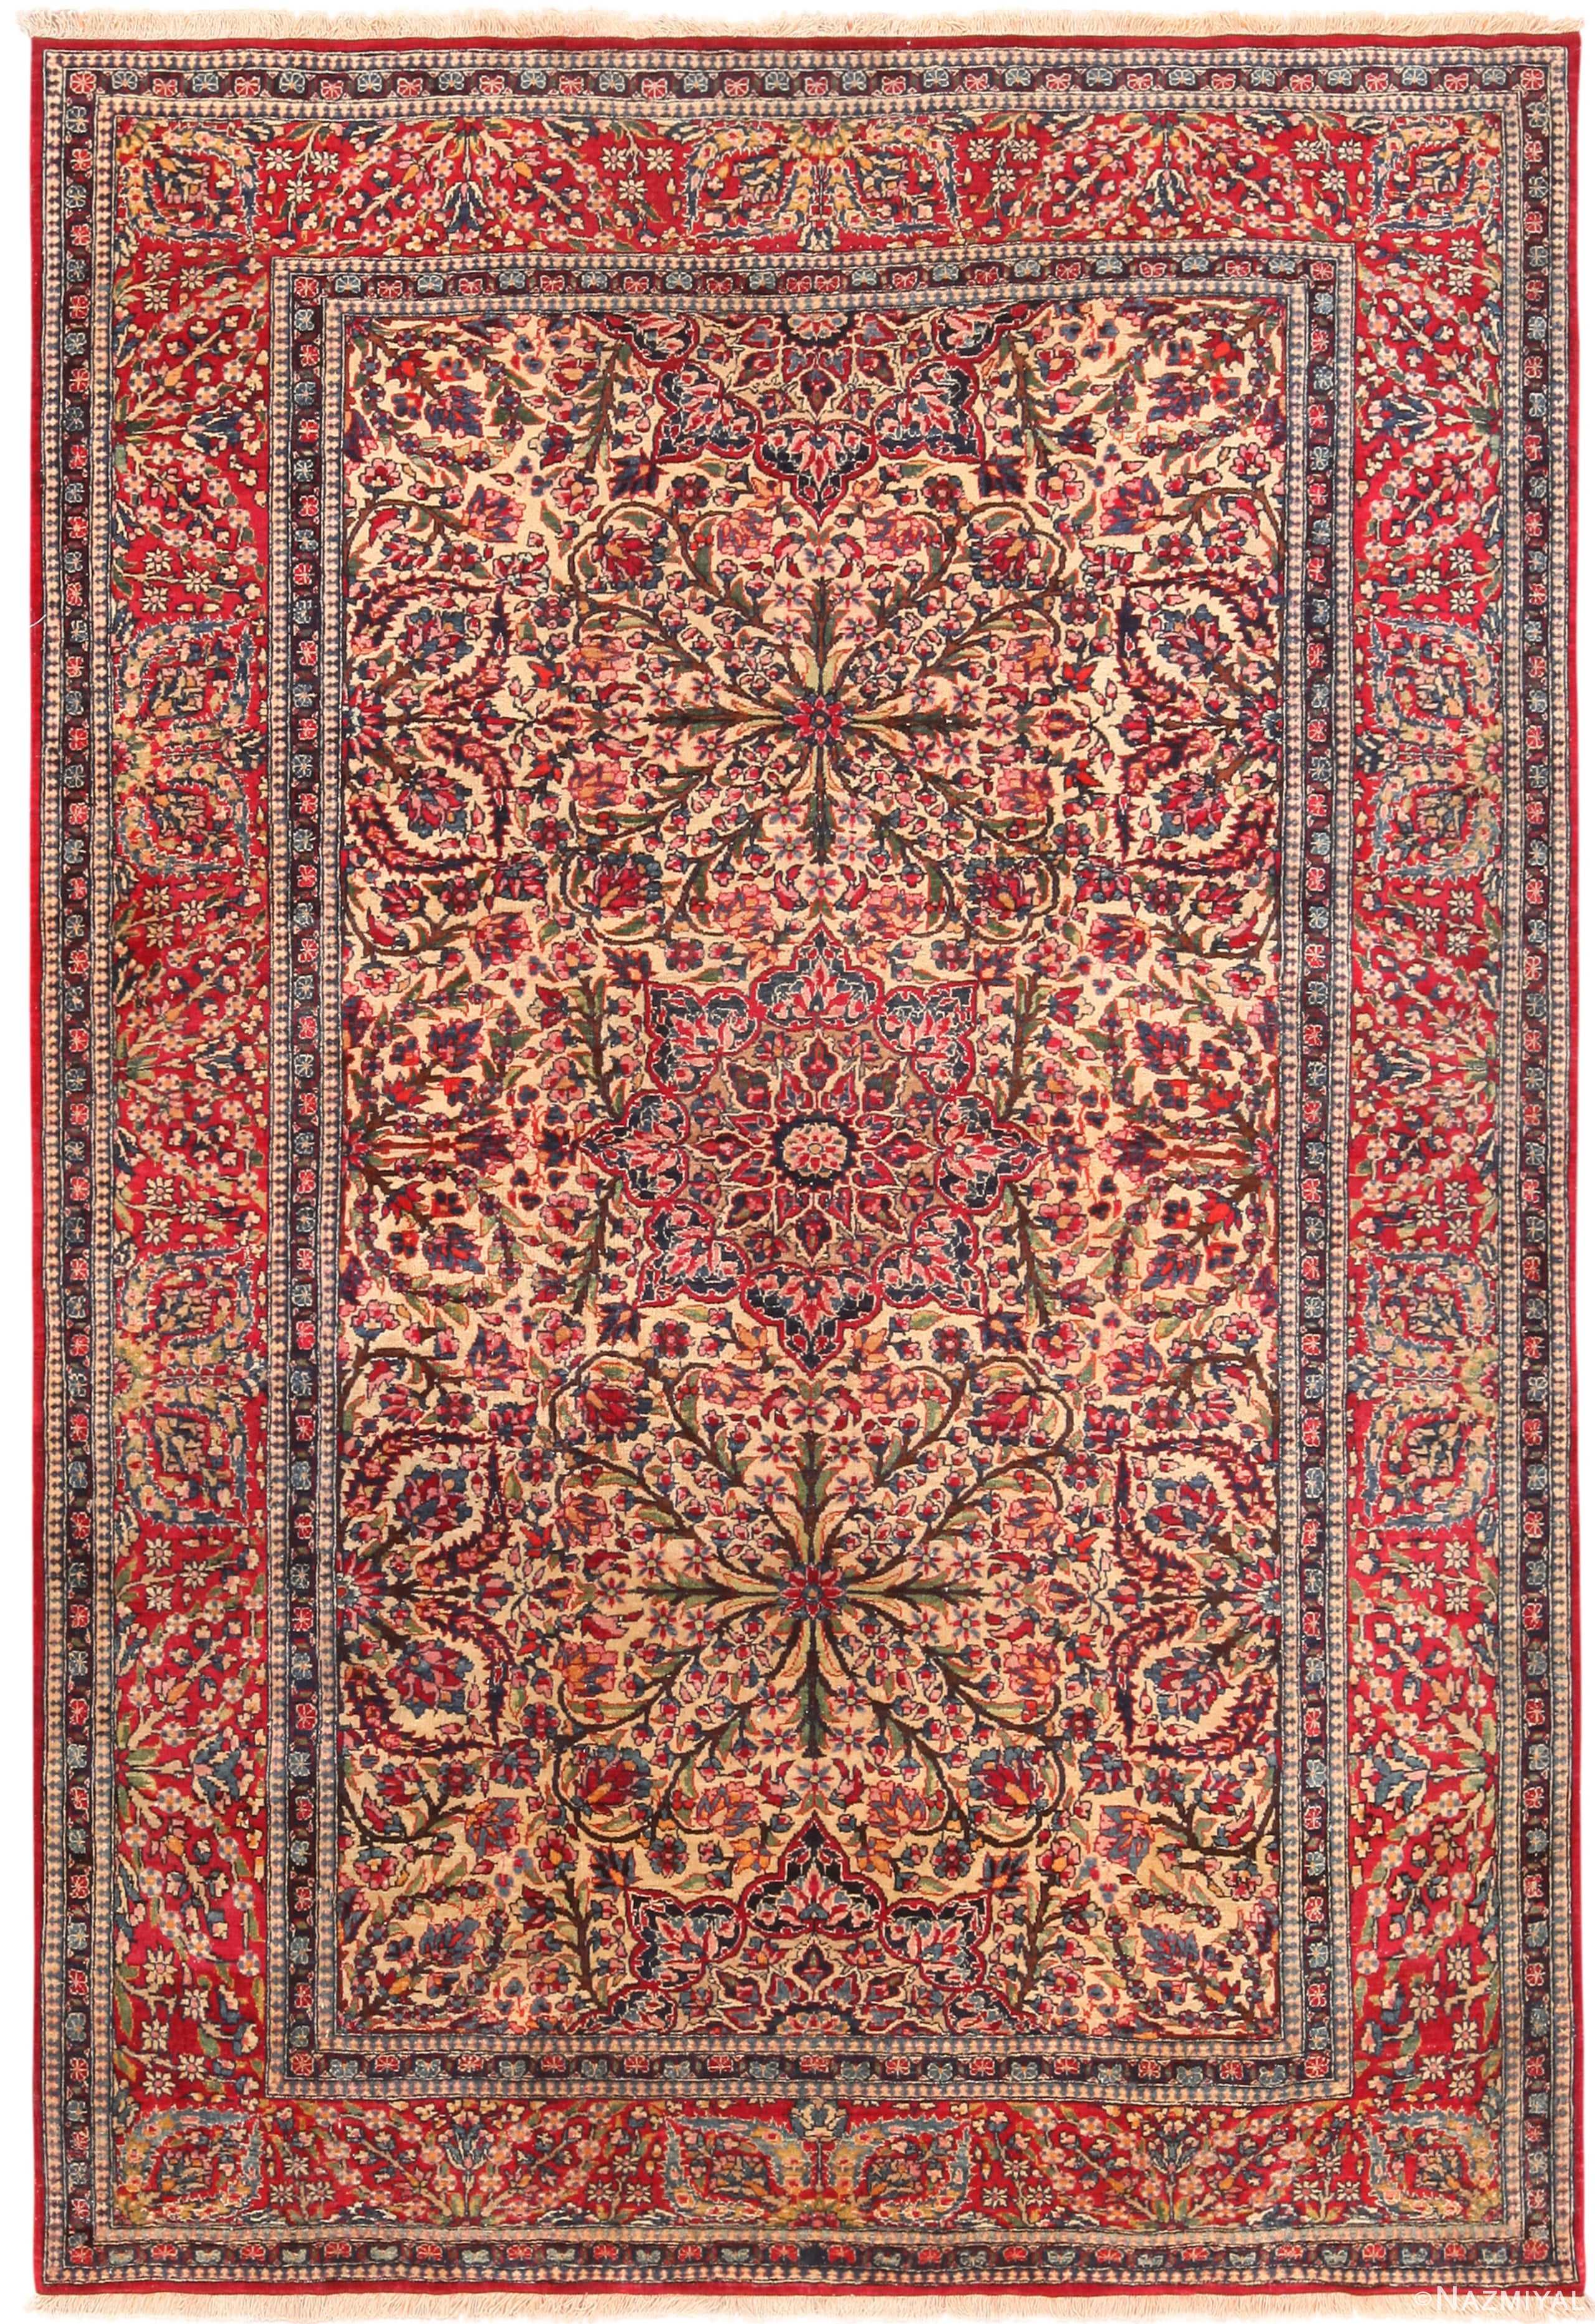 Magnificent Antique Persian Isfahan Rug 71118 by Nazmiyal Antique Rugs